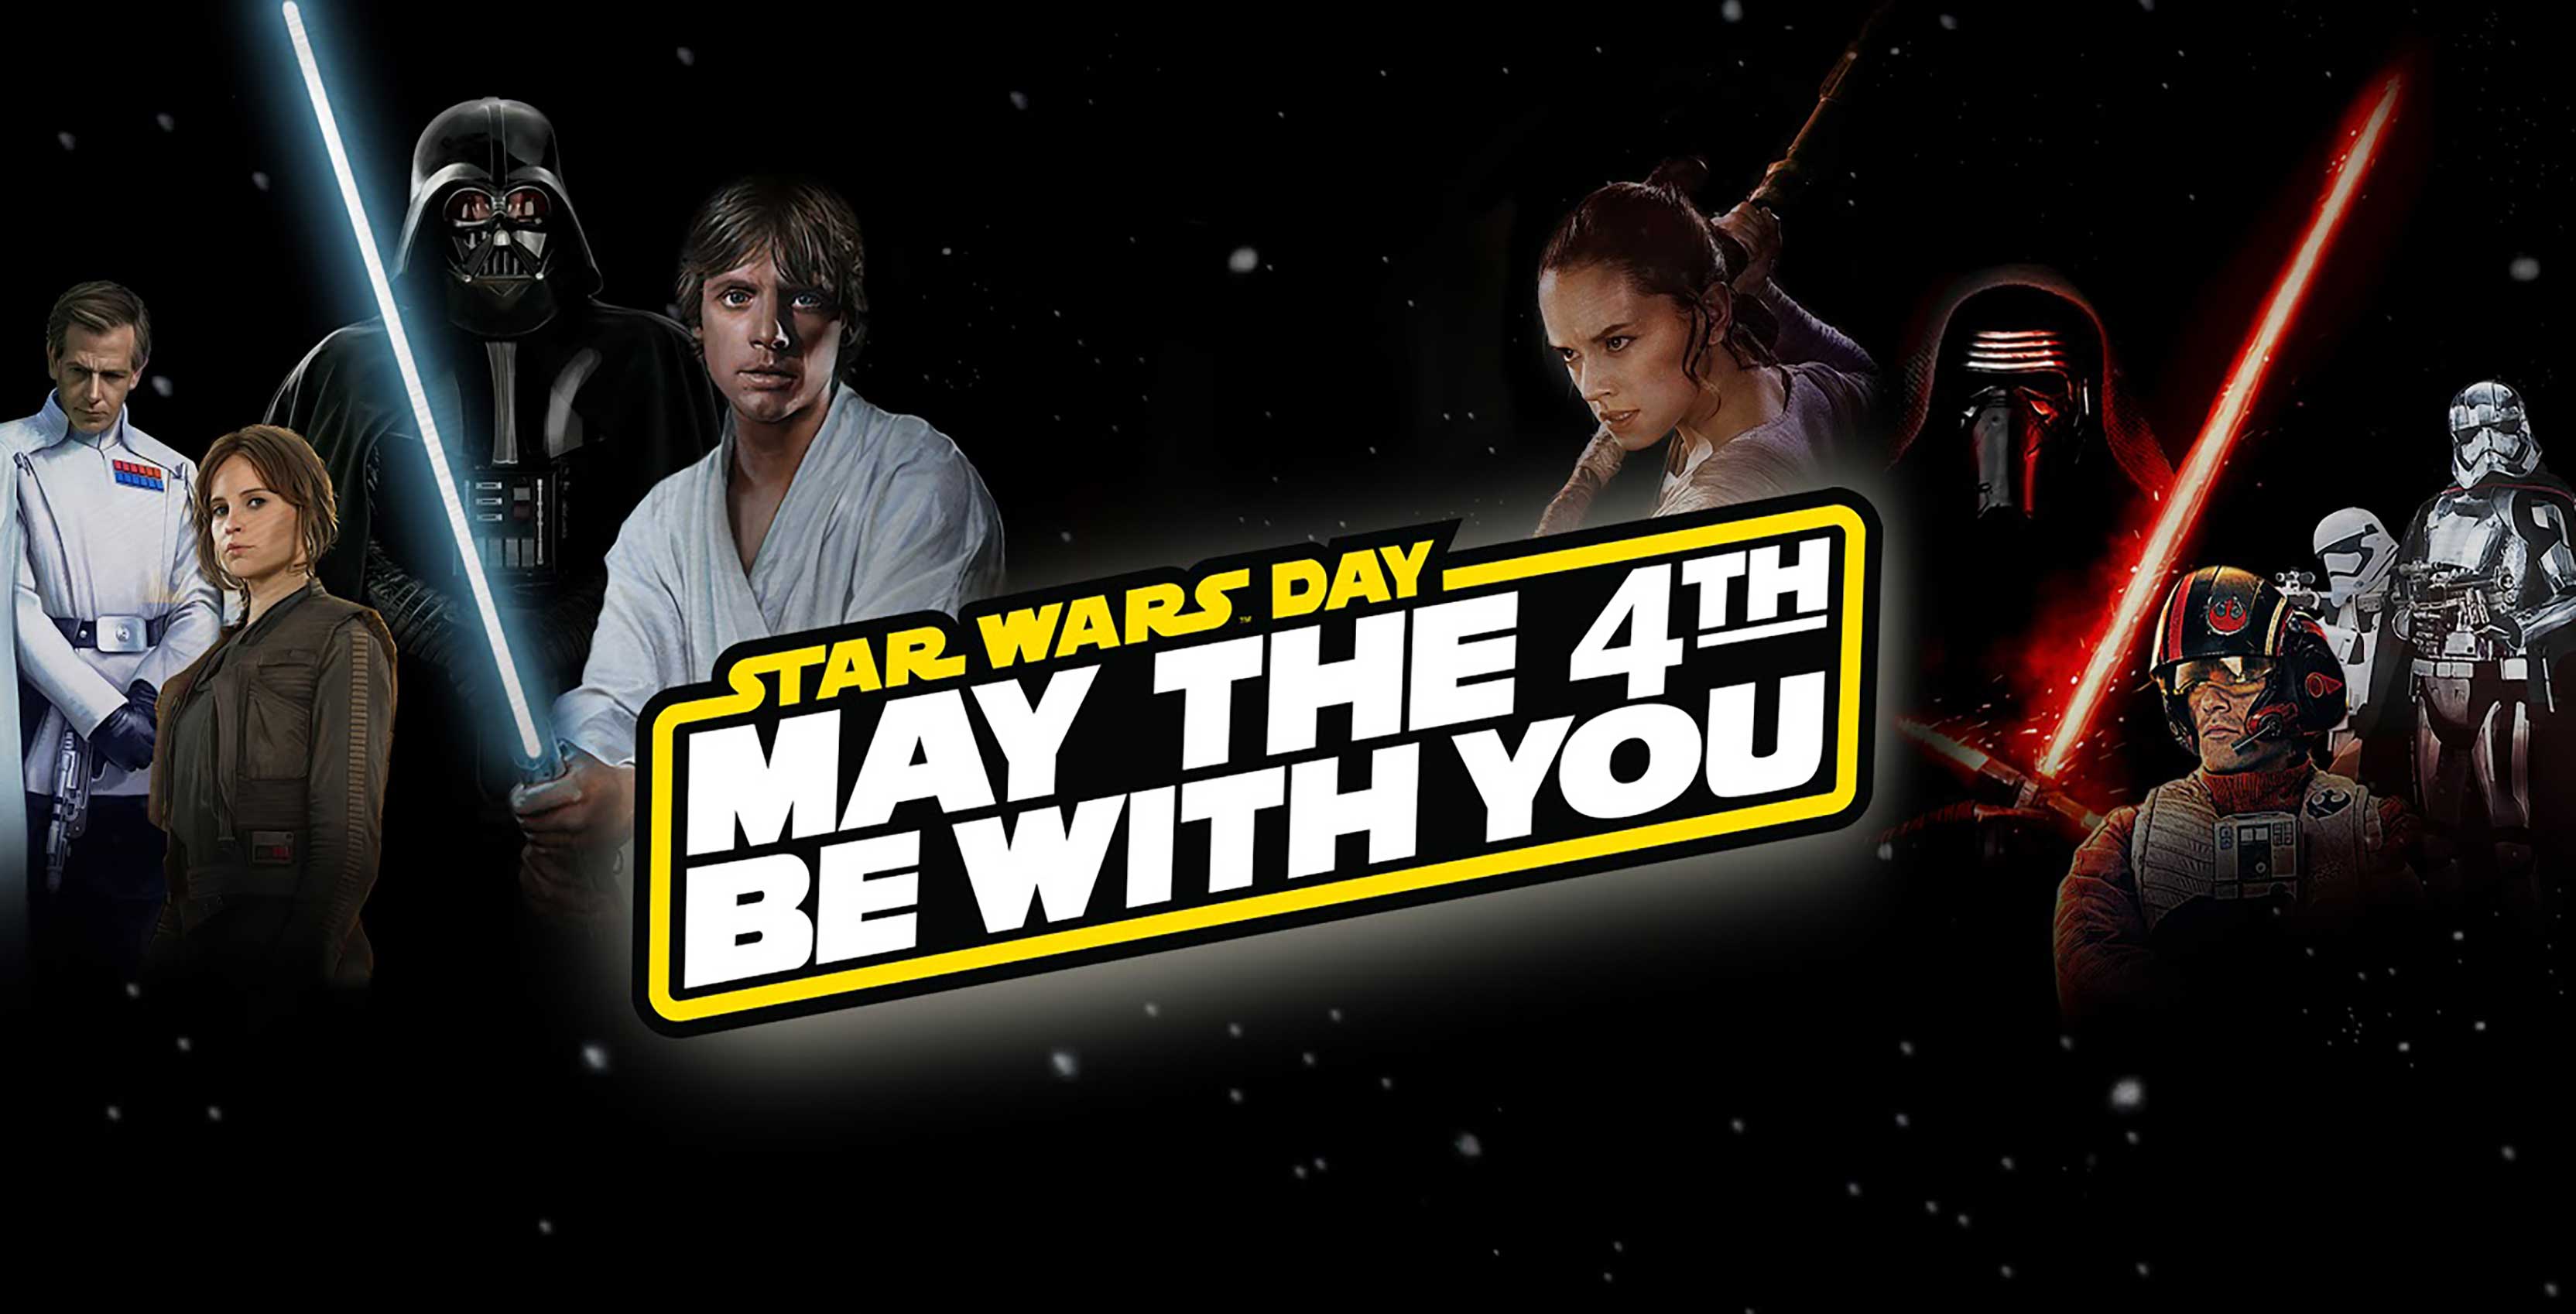 Star Wars May the 4th Be With You